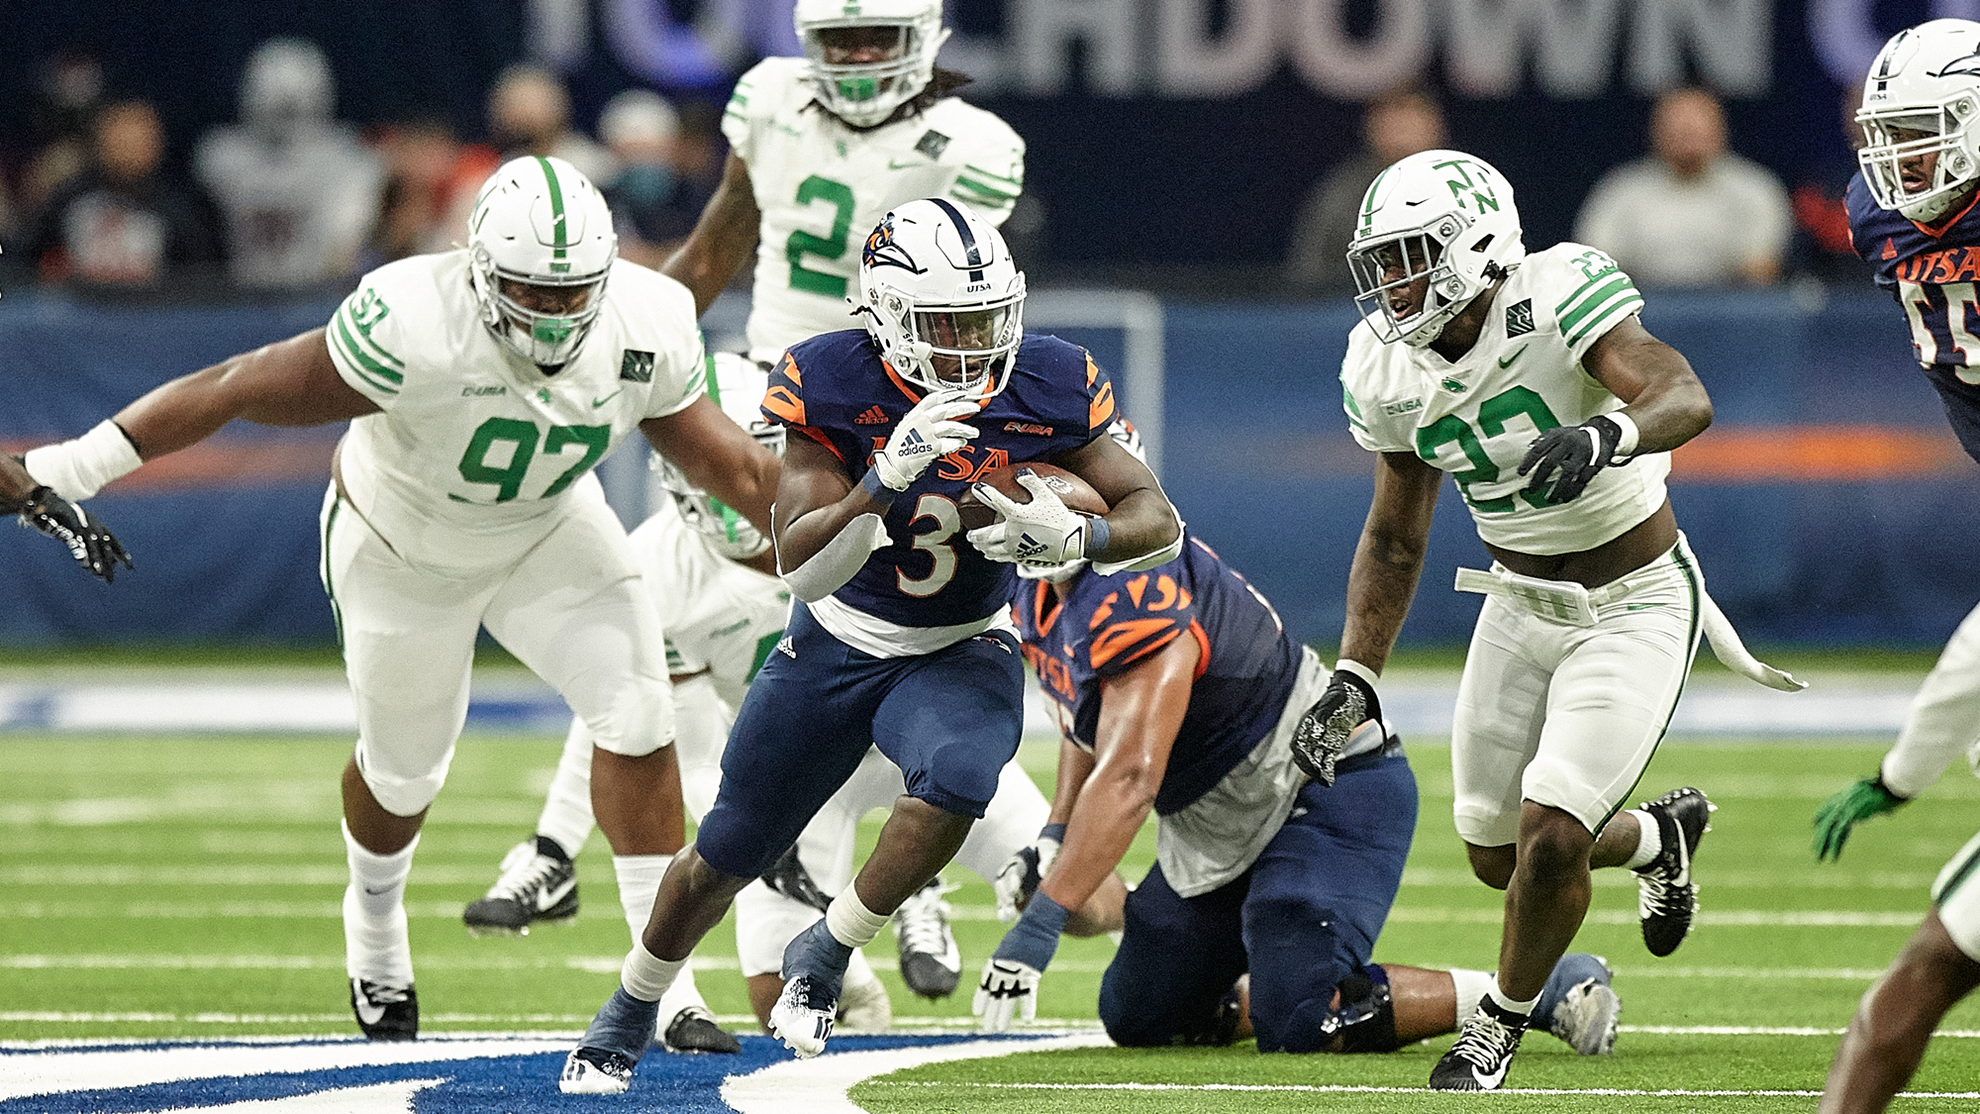 UTSA Roadrunners show off improved RB depth as fall practice opens